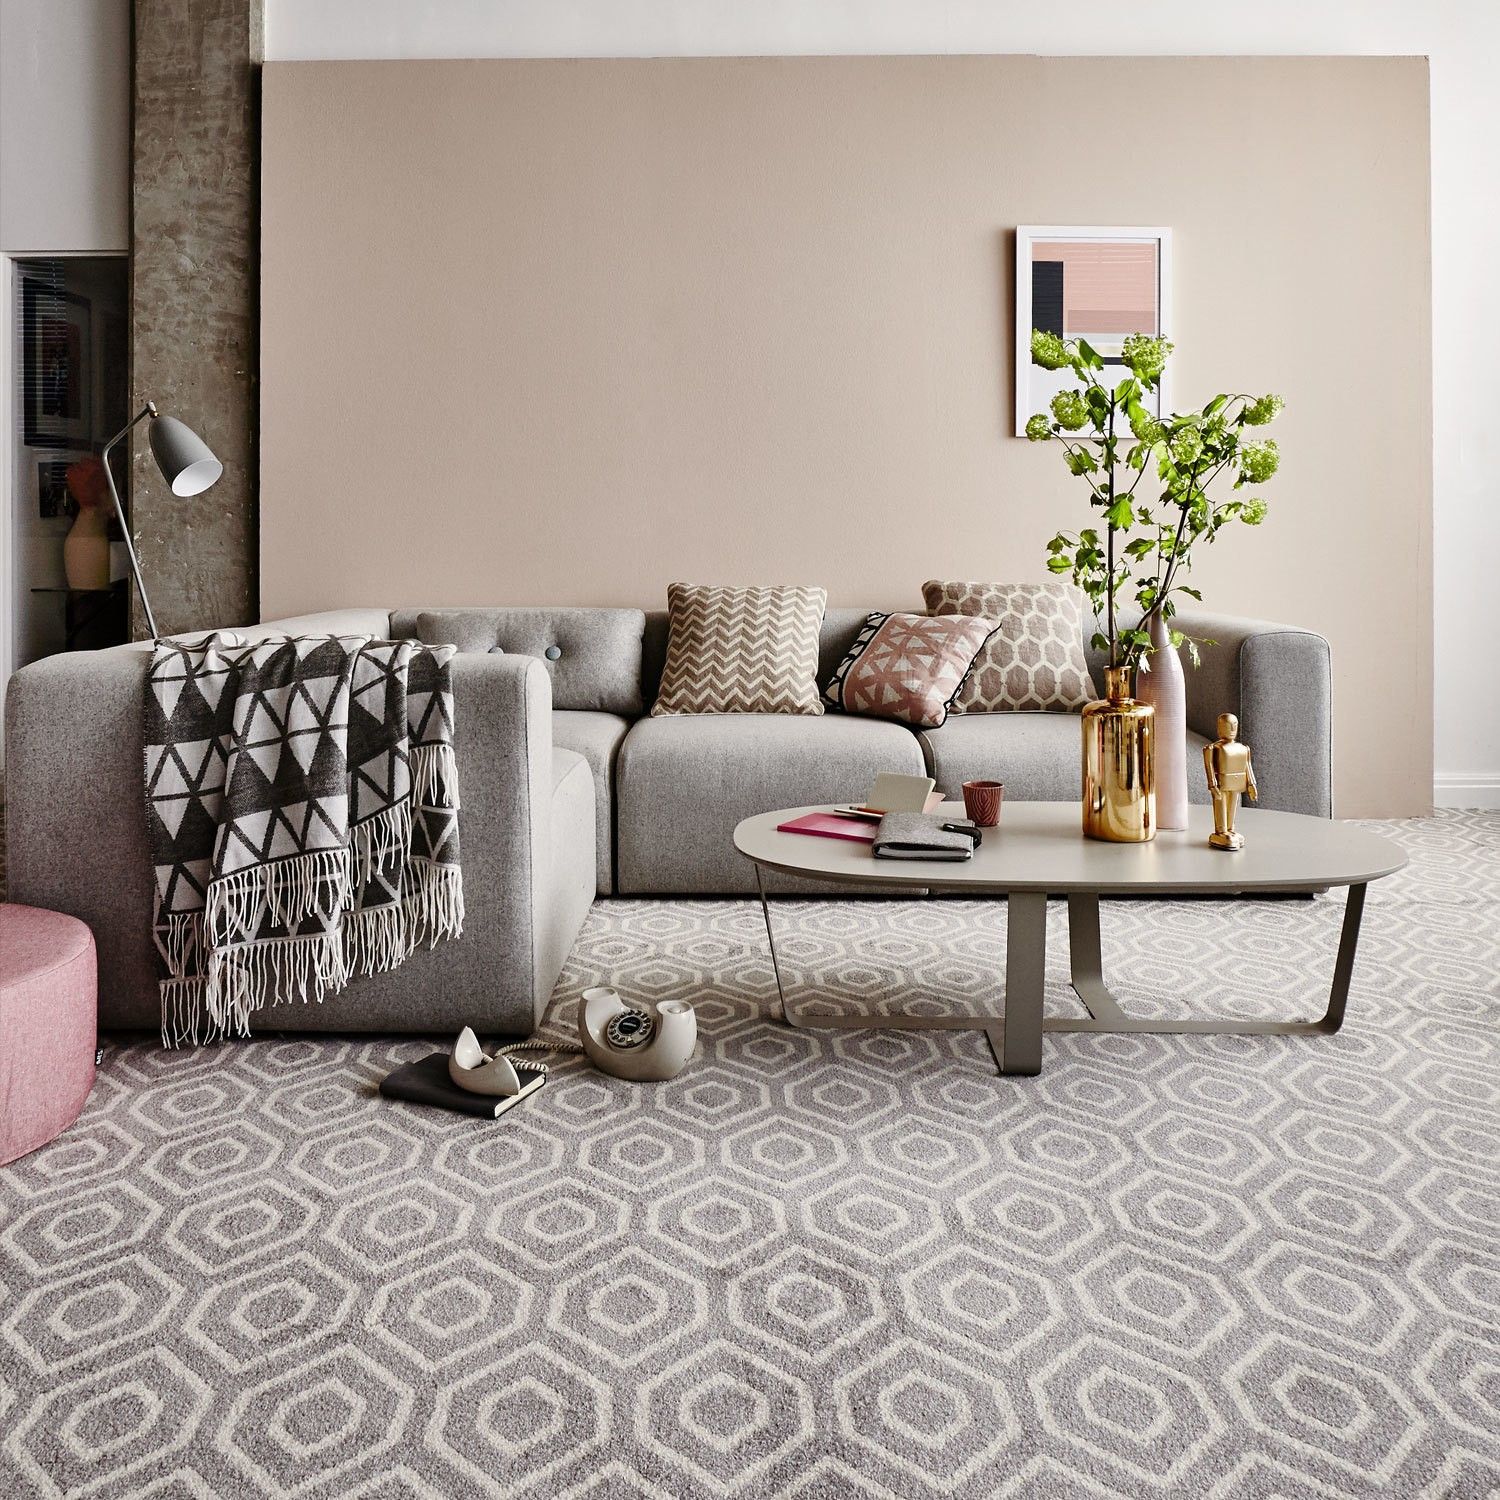 Revive Your Home Interior: Tips For Integrating Patterned Rugs Into Your Home